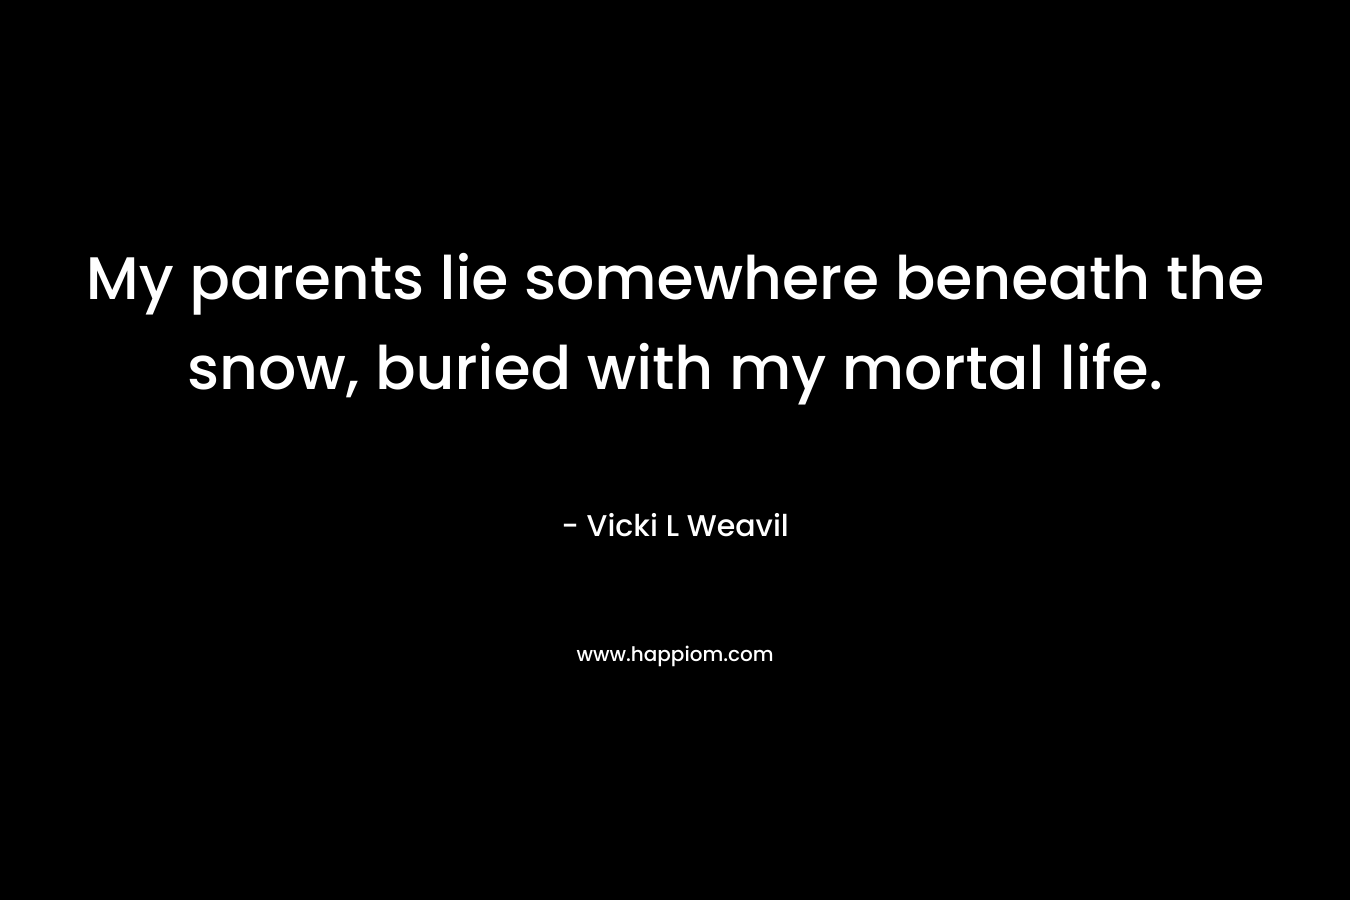 My parents lie somewhere beneath the snow, buried with my mortal life.